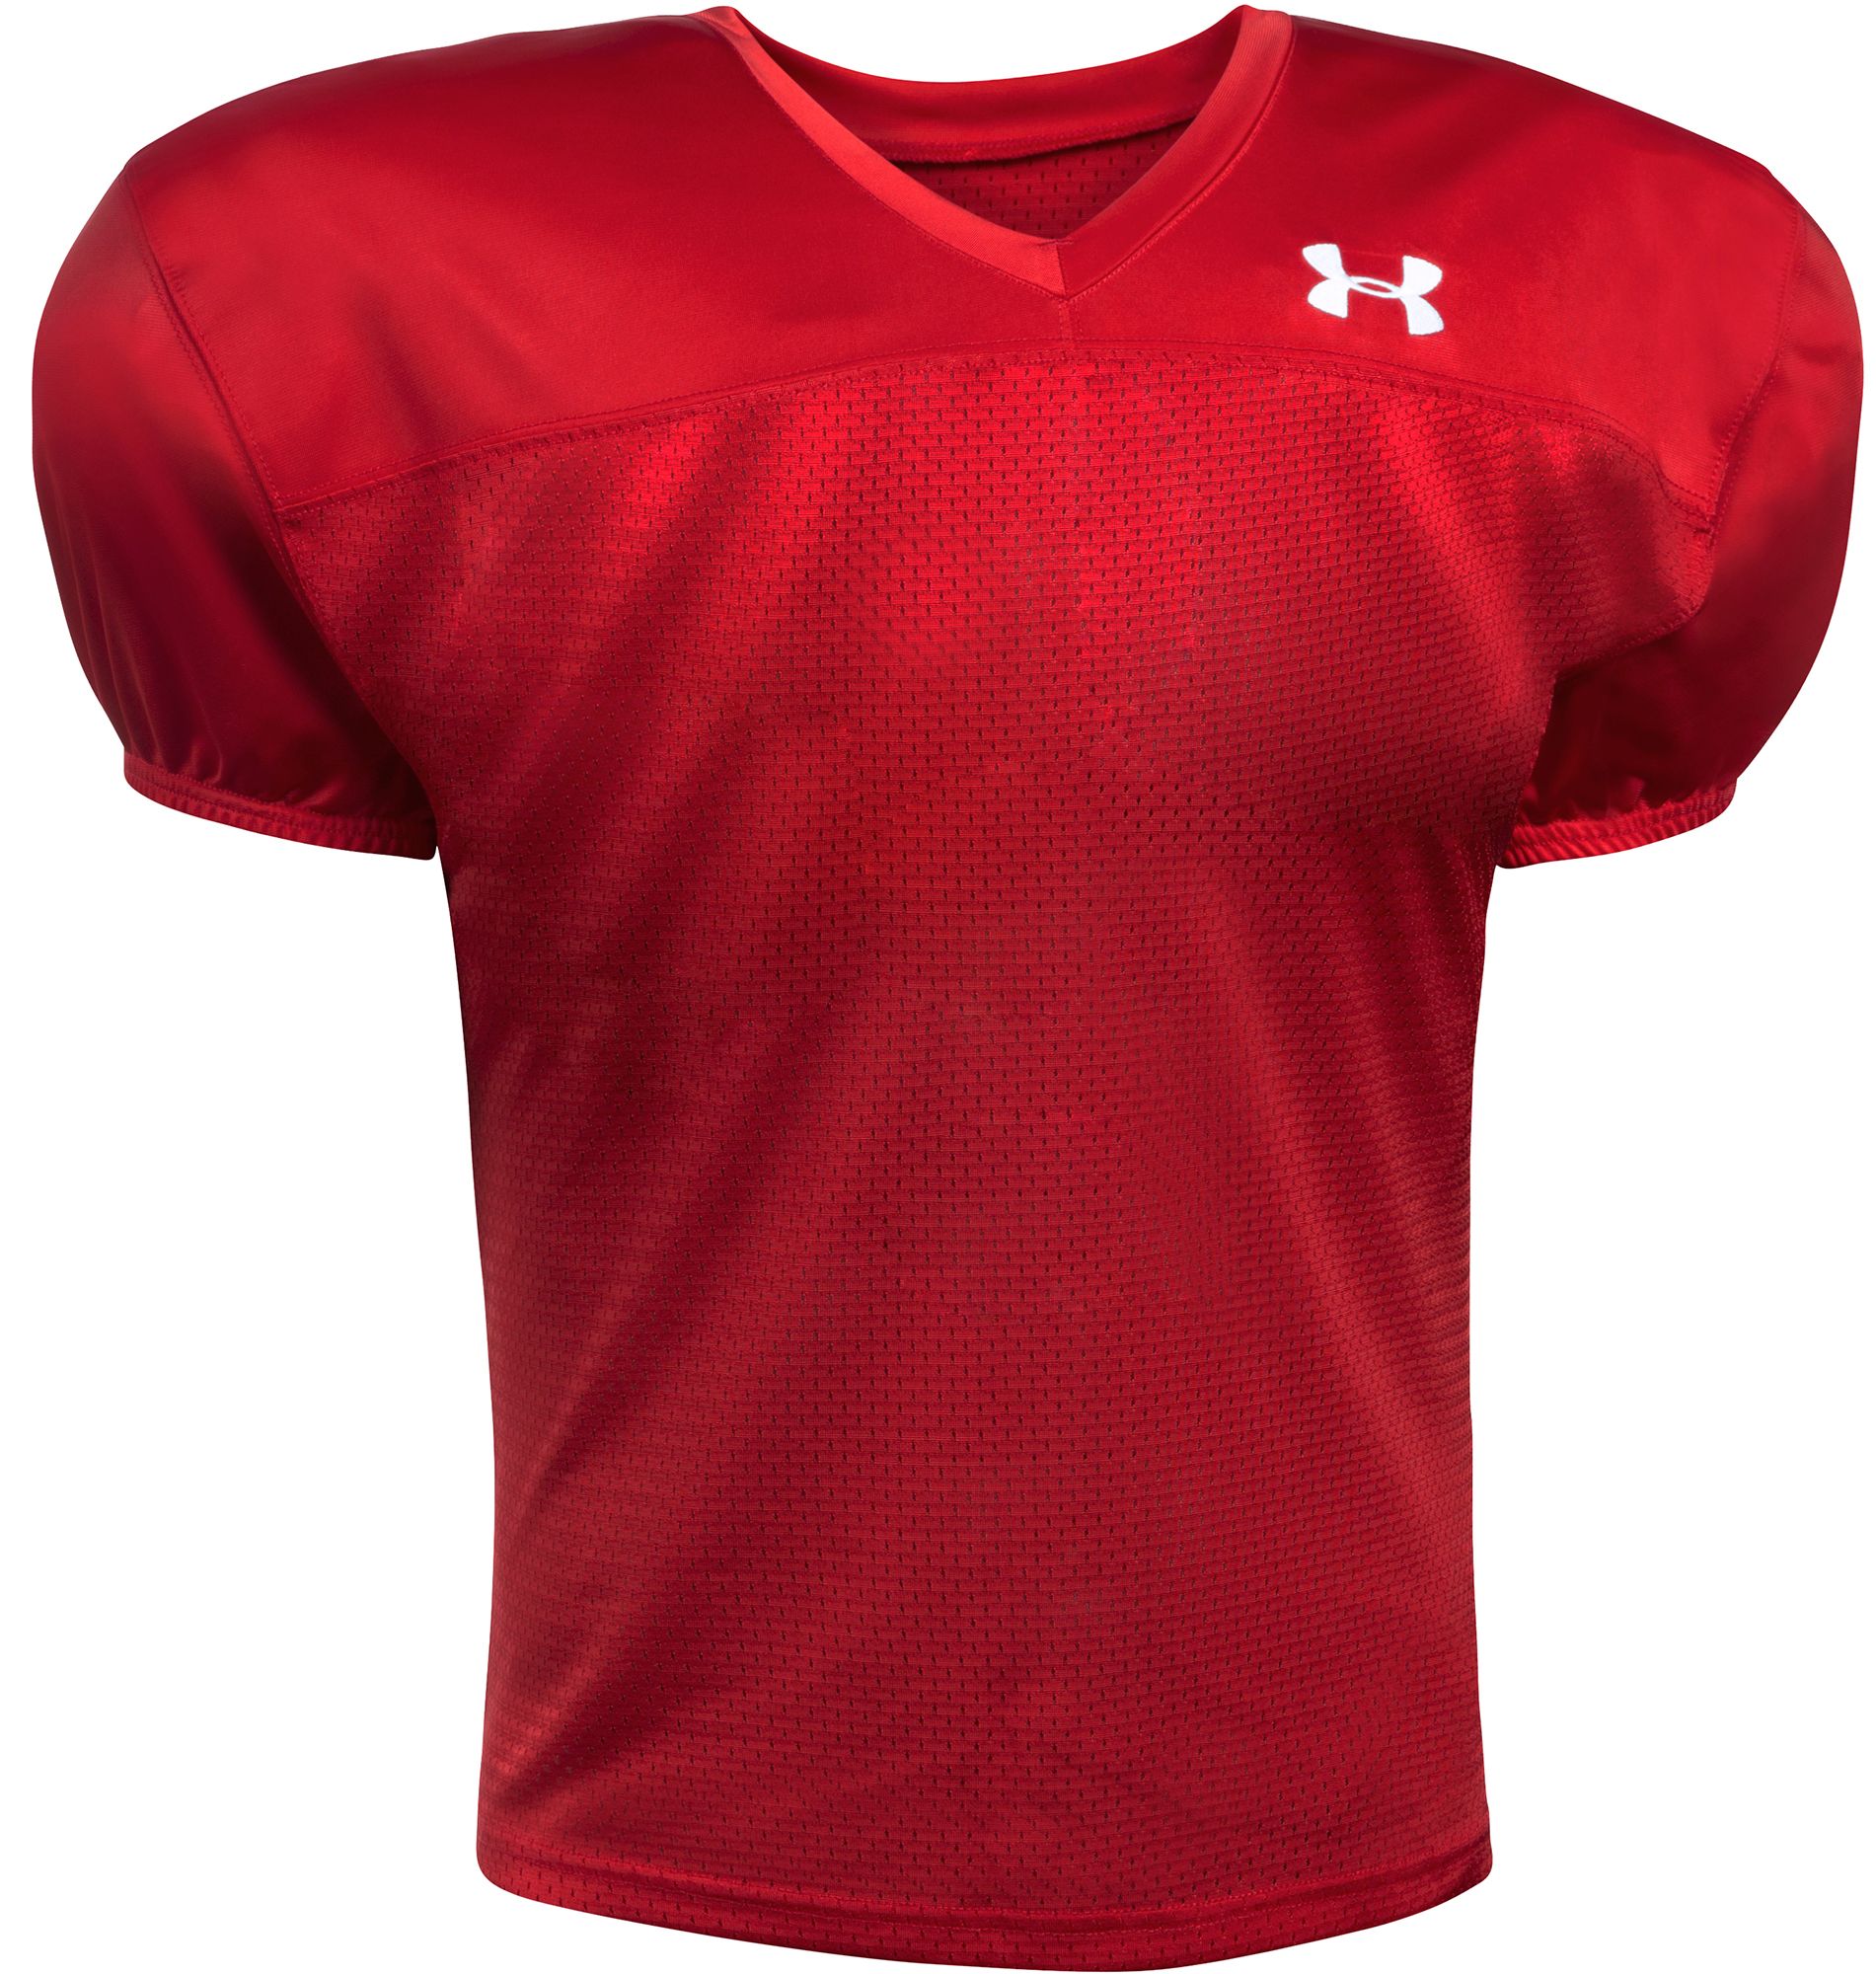 jersey under armour